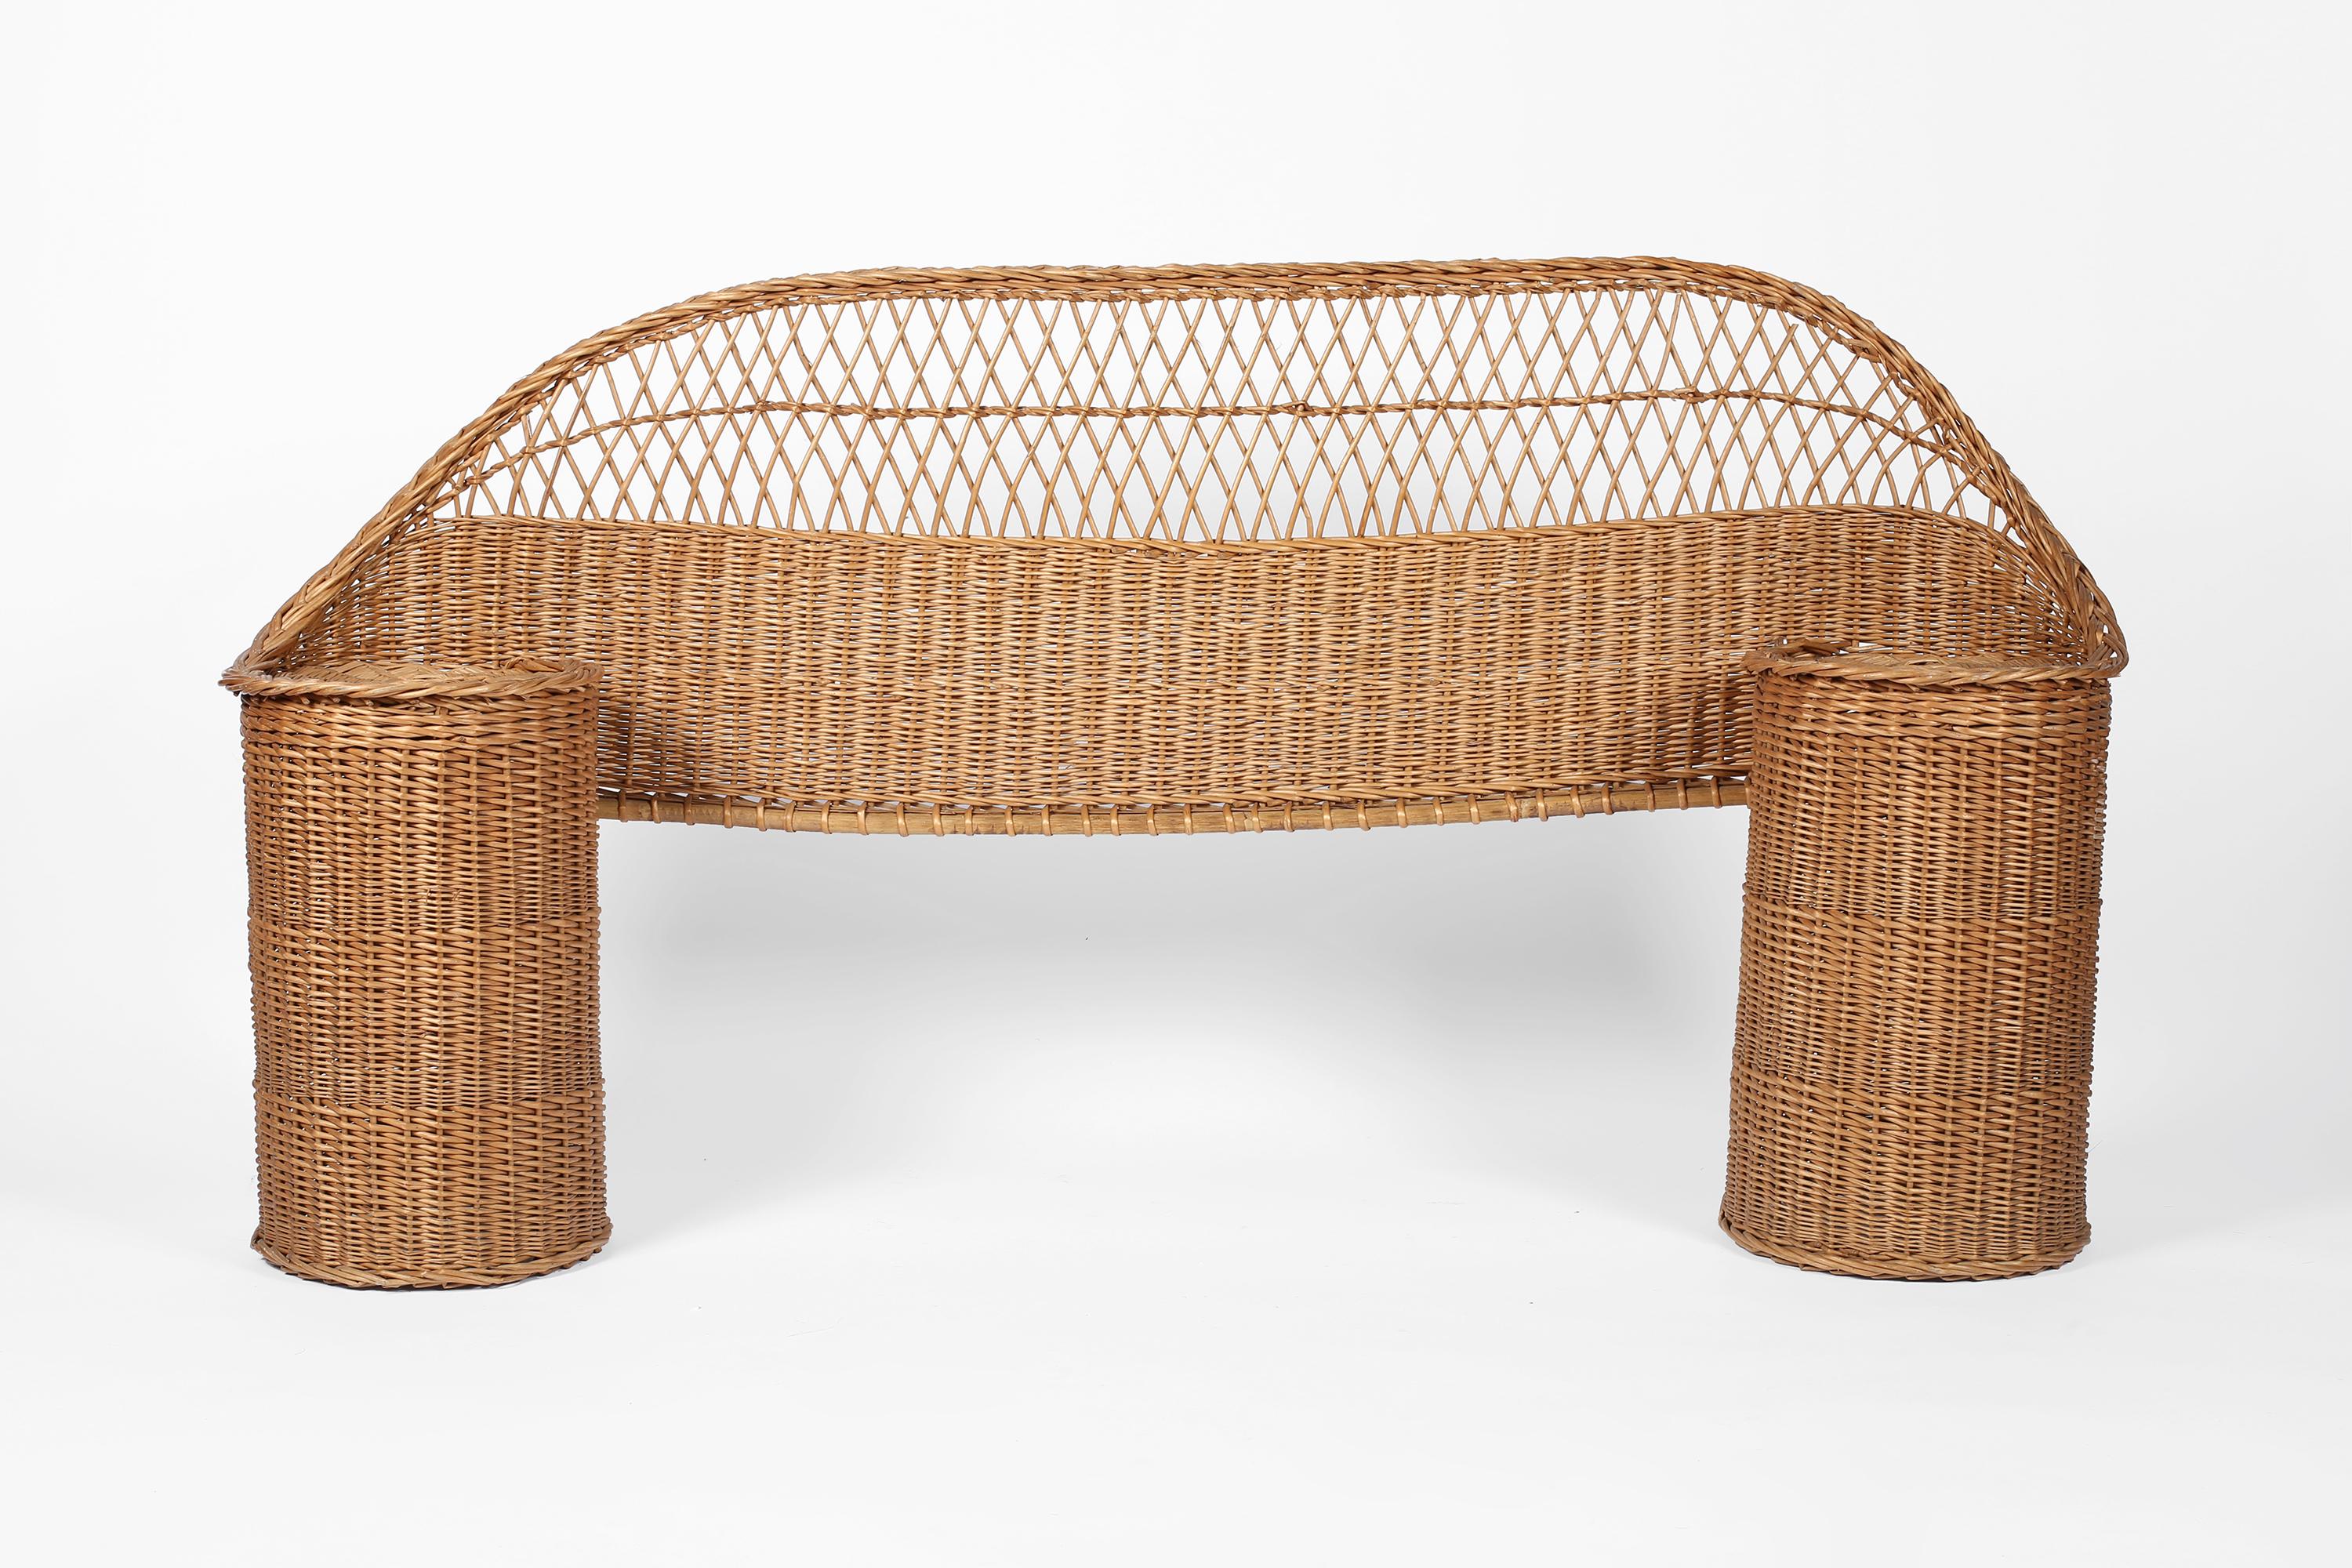 A single woven wicker headboard from Provence, with integrated circular bedside tables. French, c. 1960s.

Between bedsides 100cm.